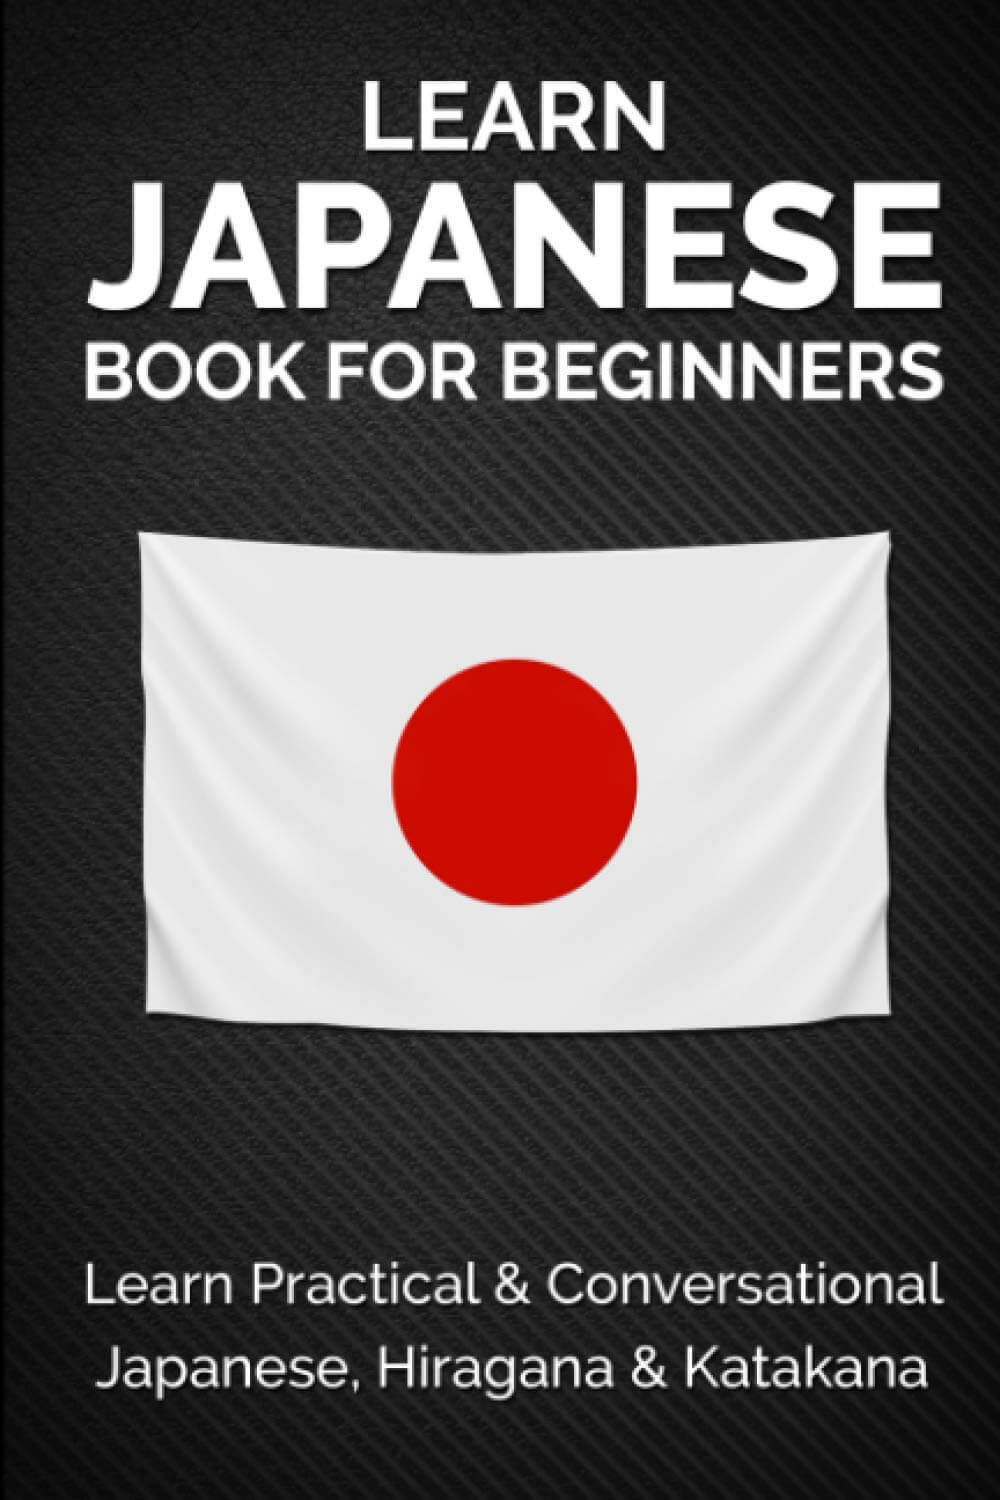 learn japanese book for beginners bookcover